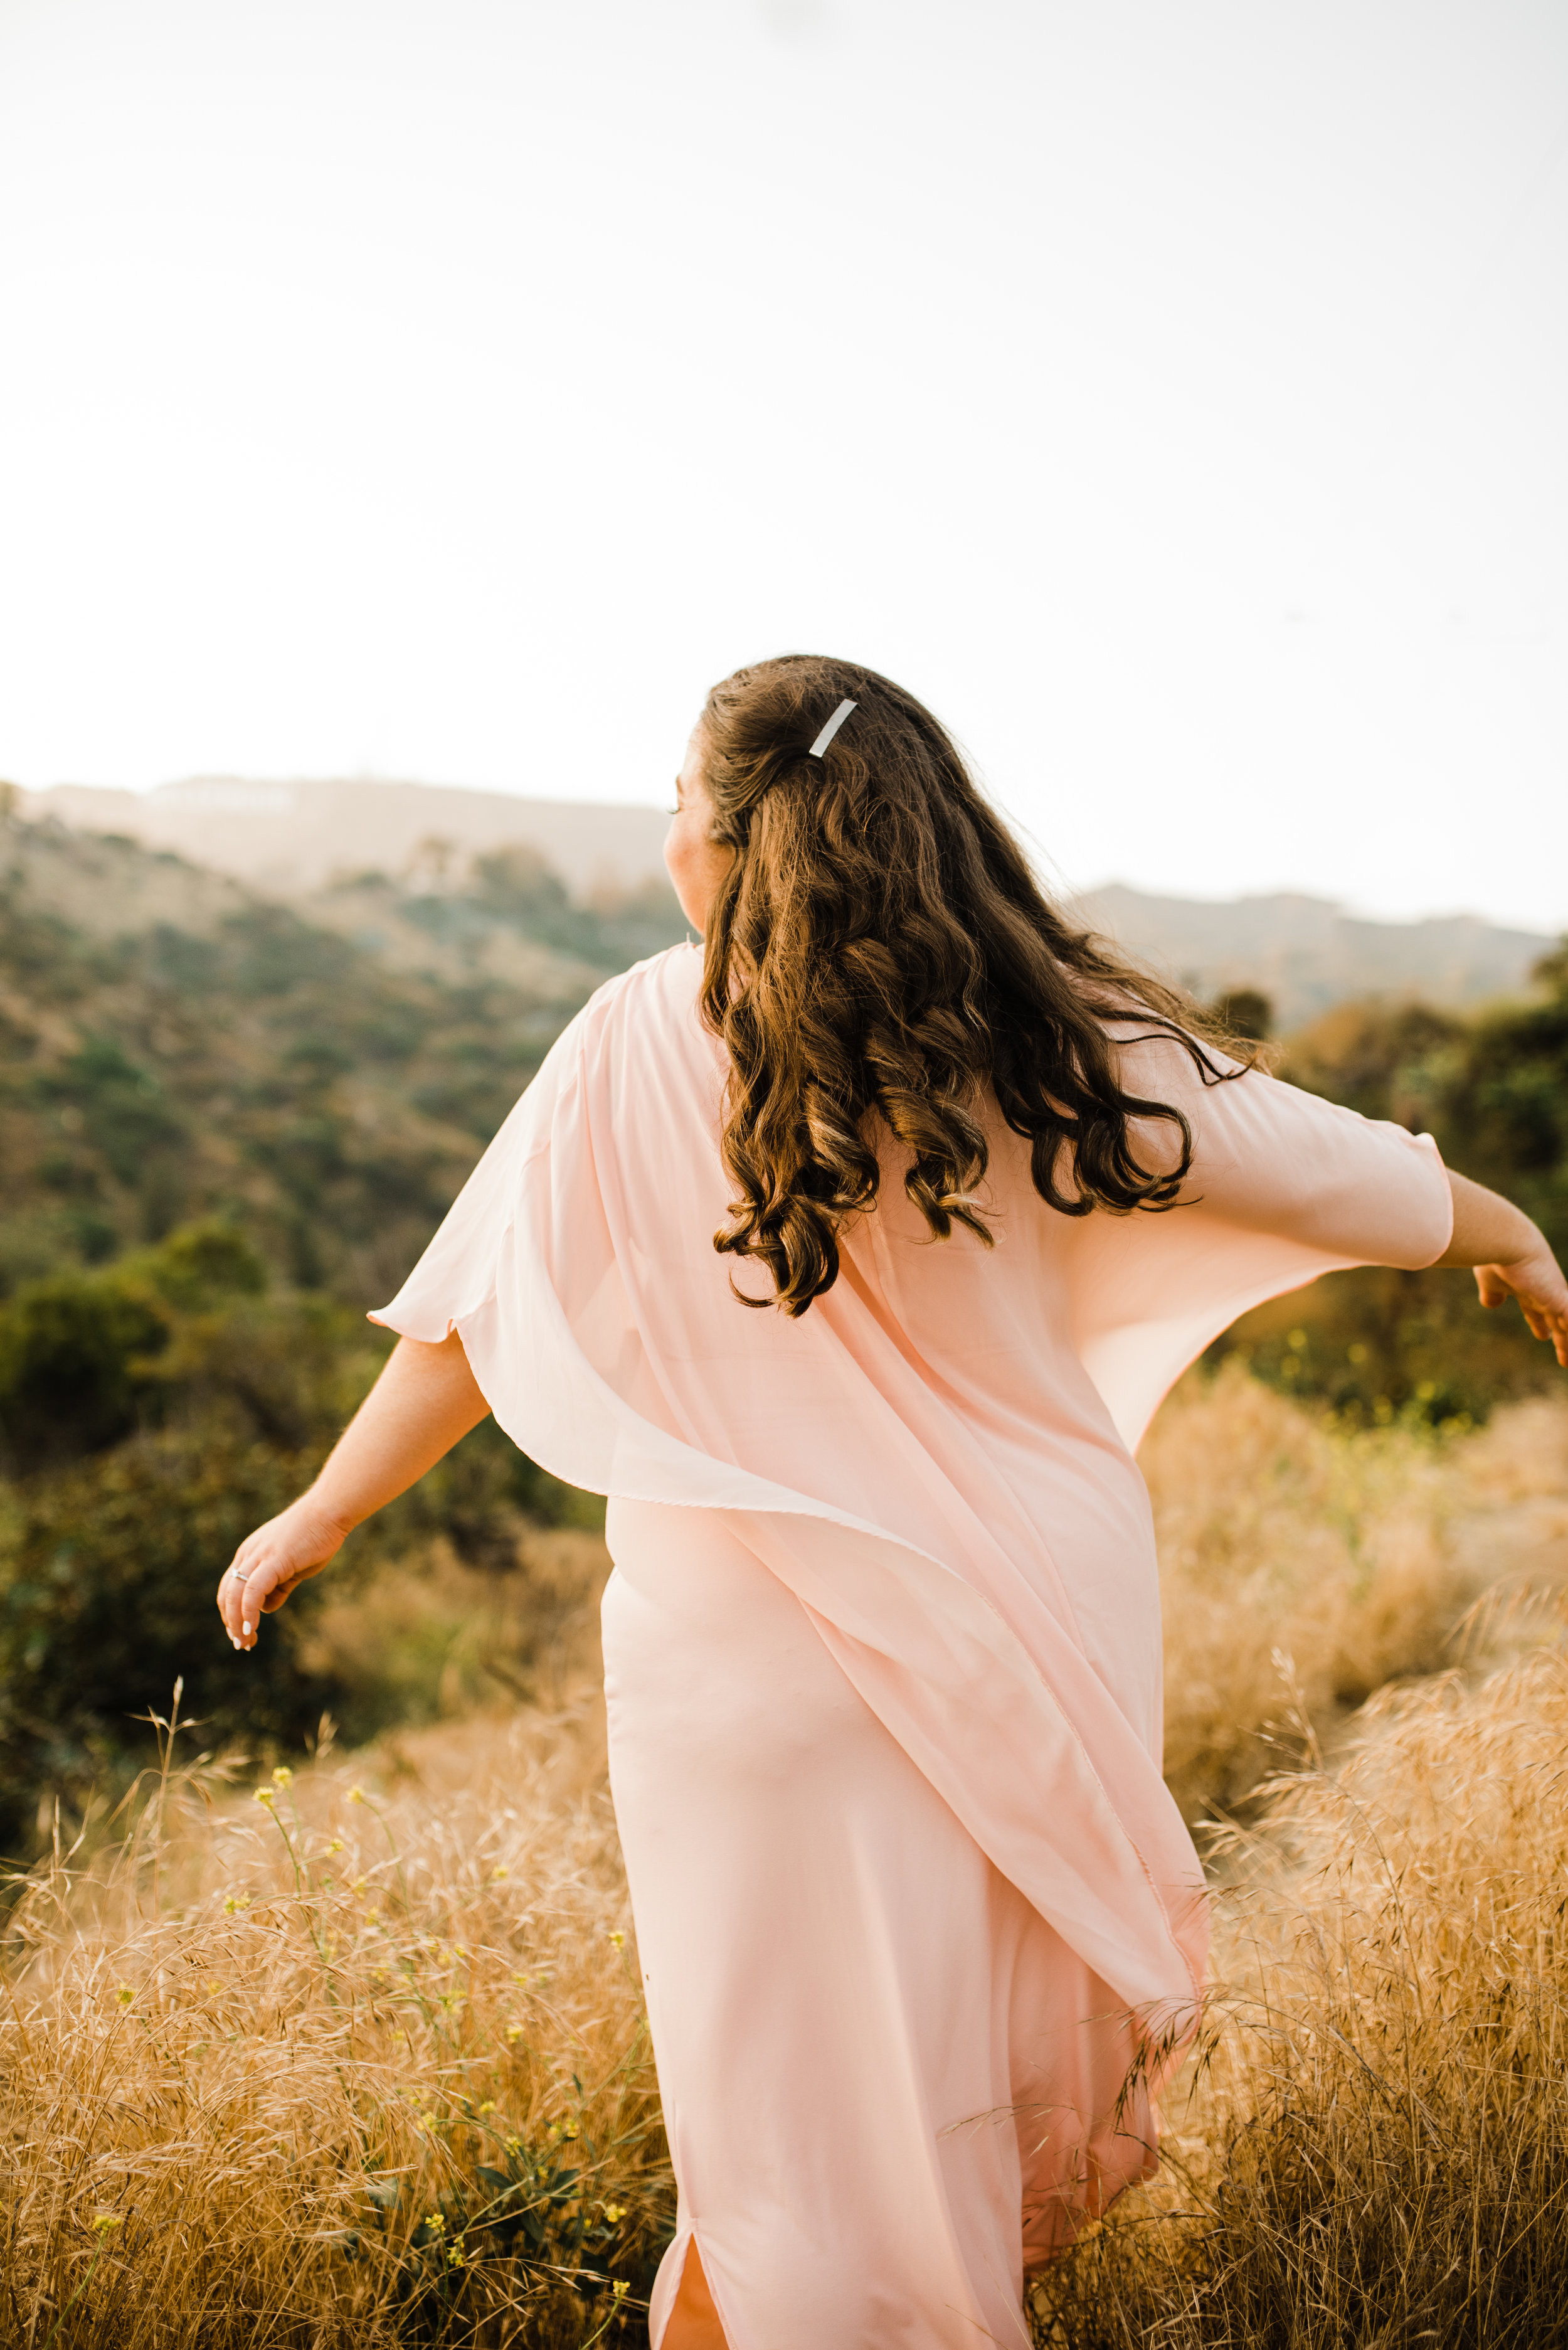 Michelle wore a beautiful pink sheer cape dress for her adventurous engagement session in Los Angeles, California